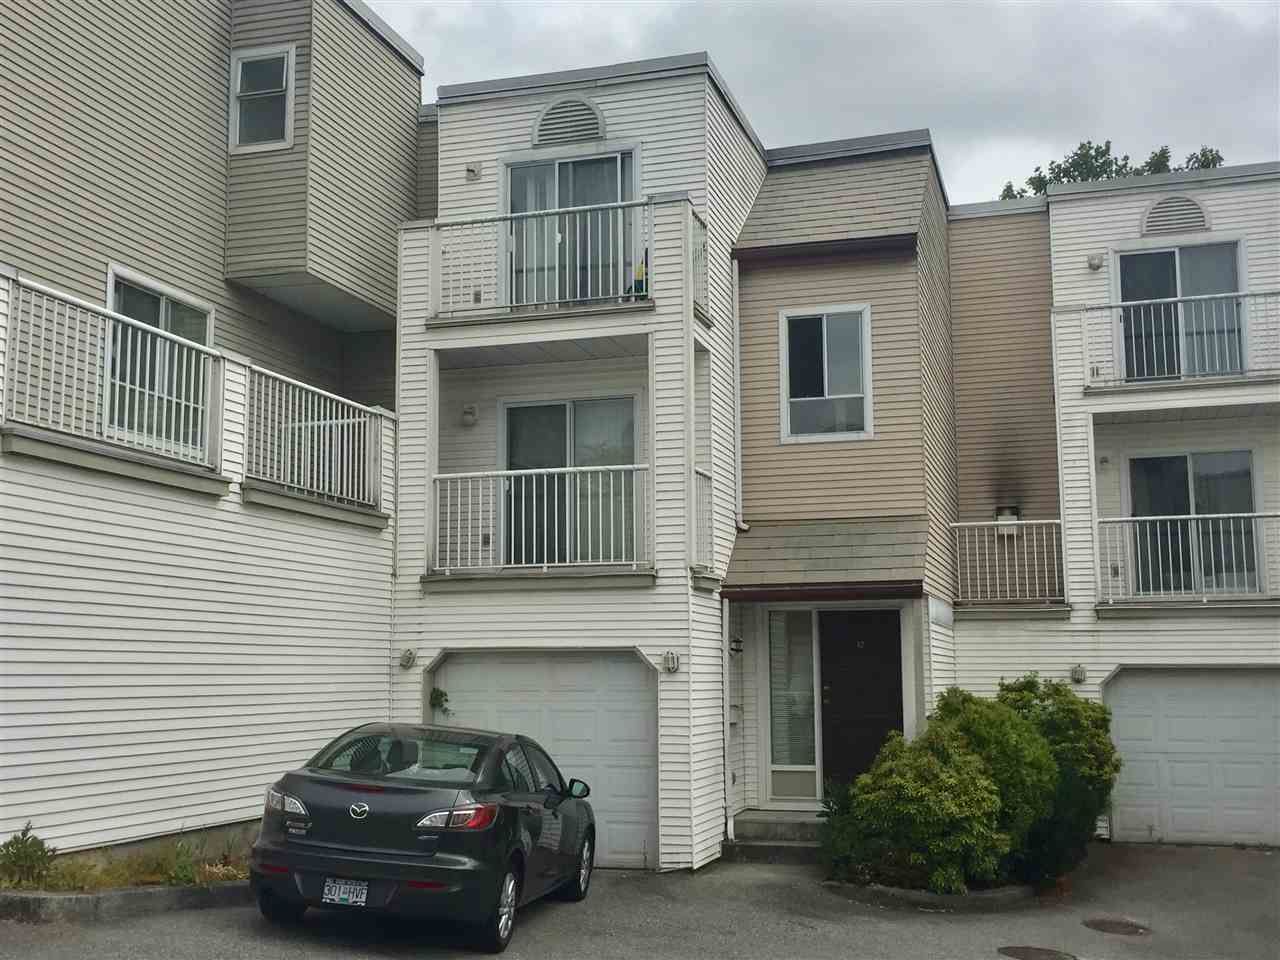 Main Photo: 12 1850 HARBOUR STREET in : Citadel PQ Townhouse for sale : MLS®# R2198105